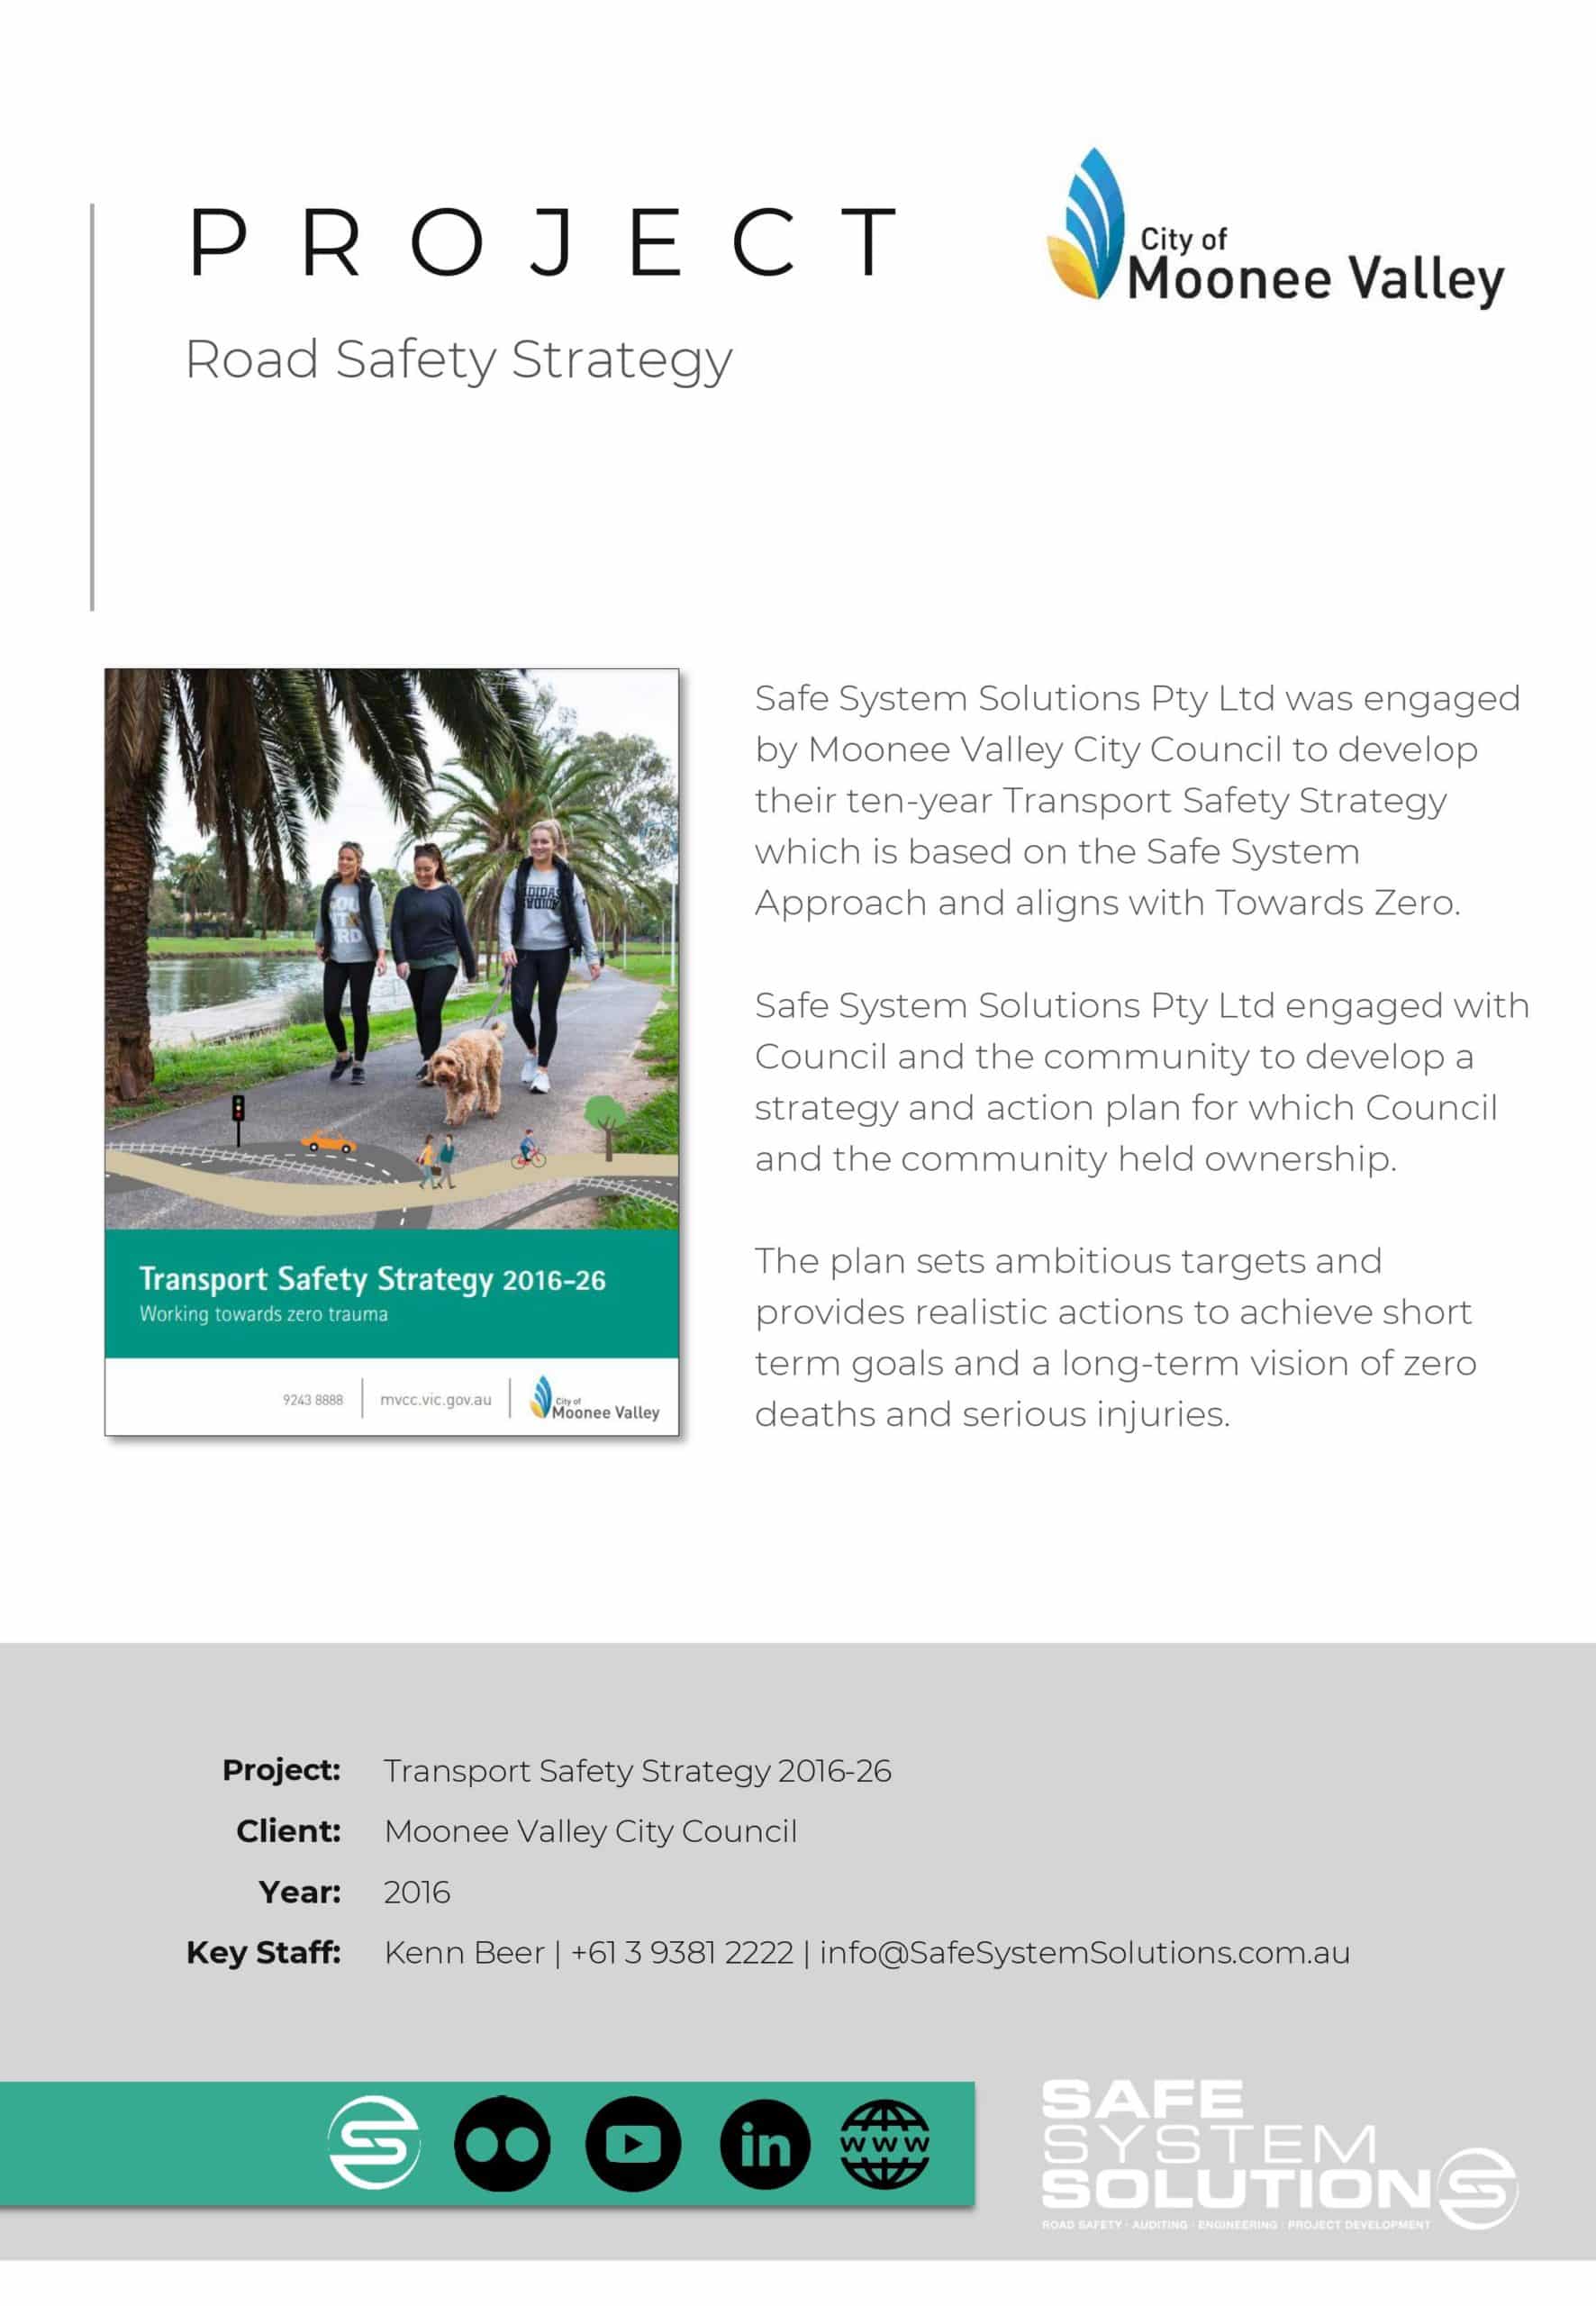 Road Safety Strategy Moonee Valley